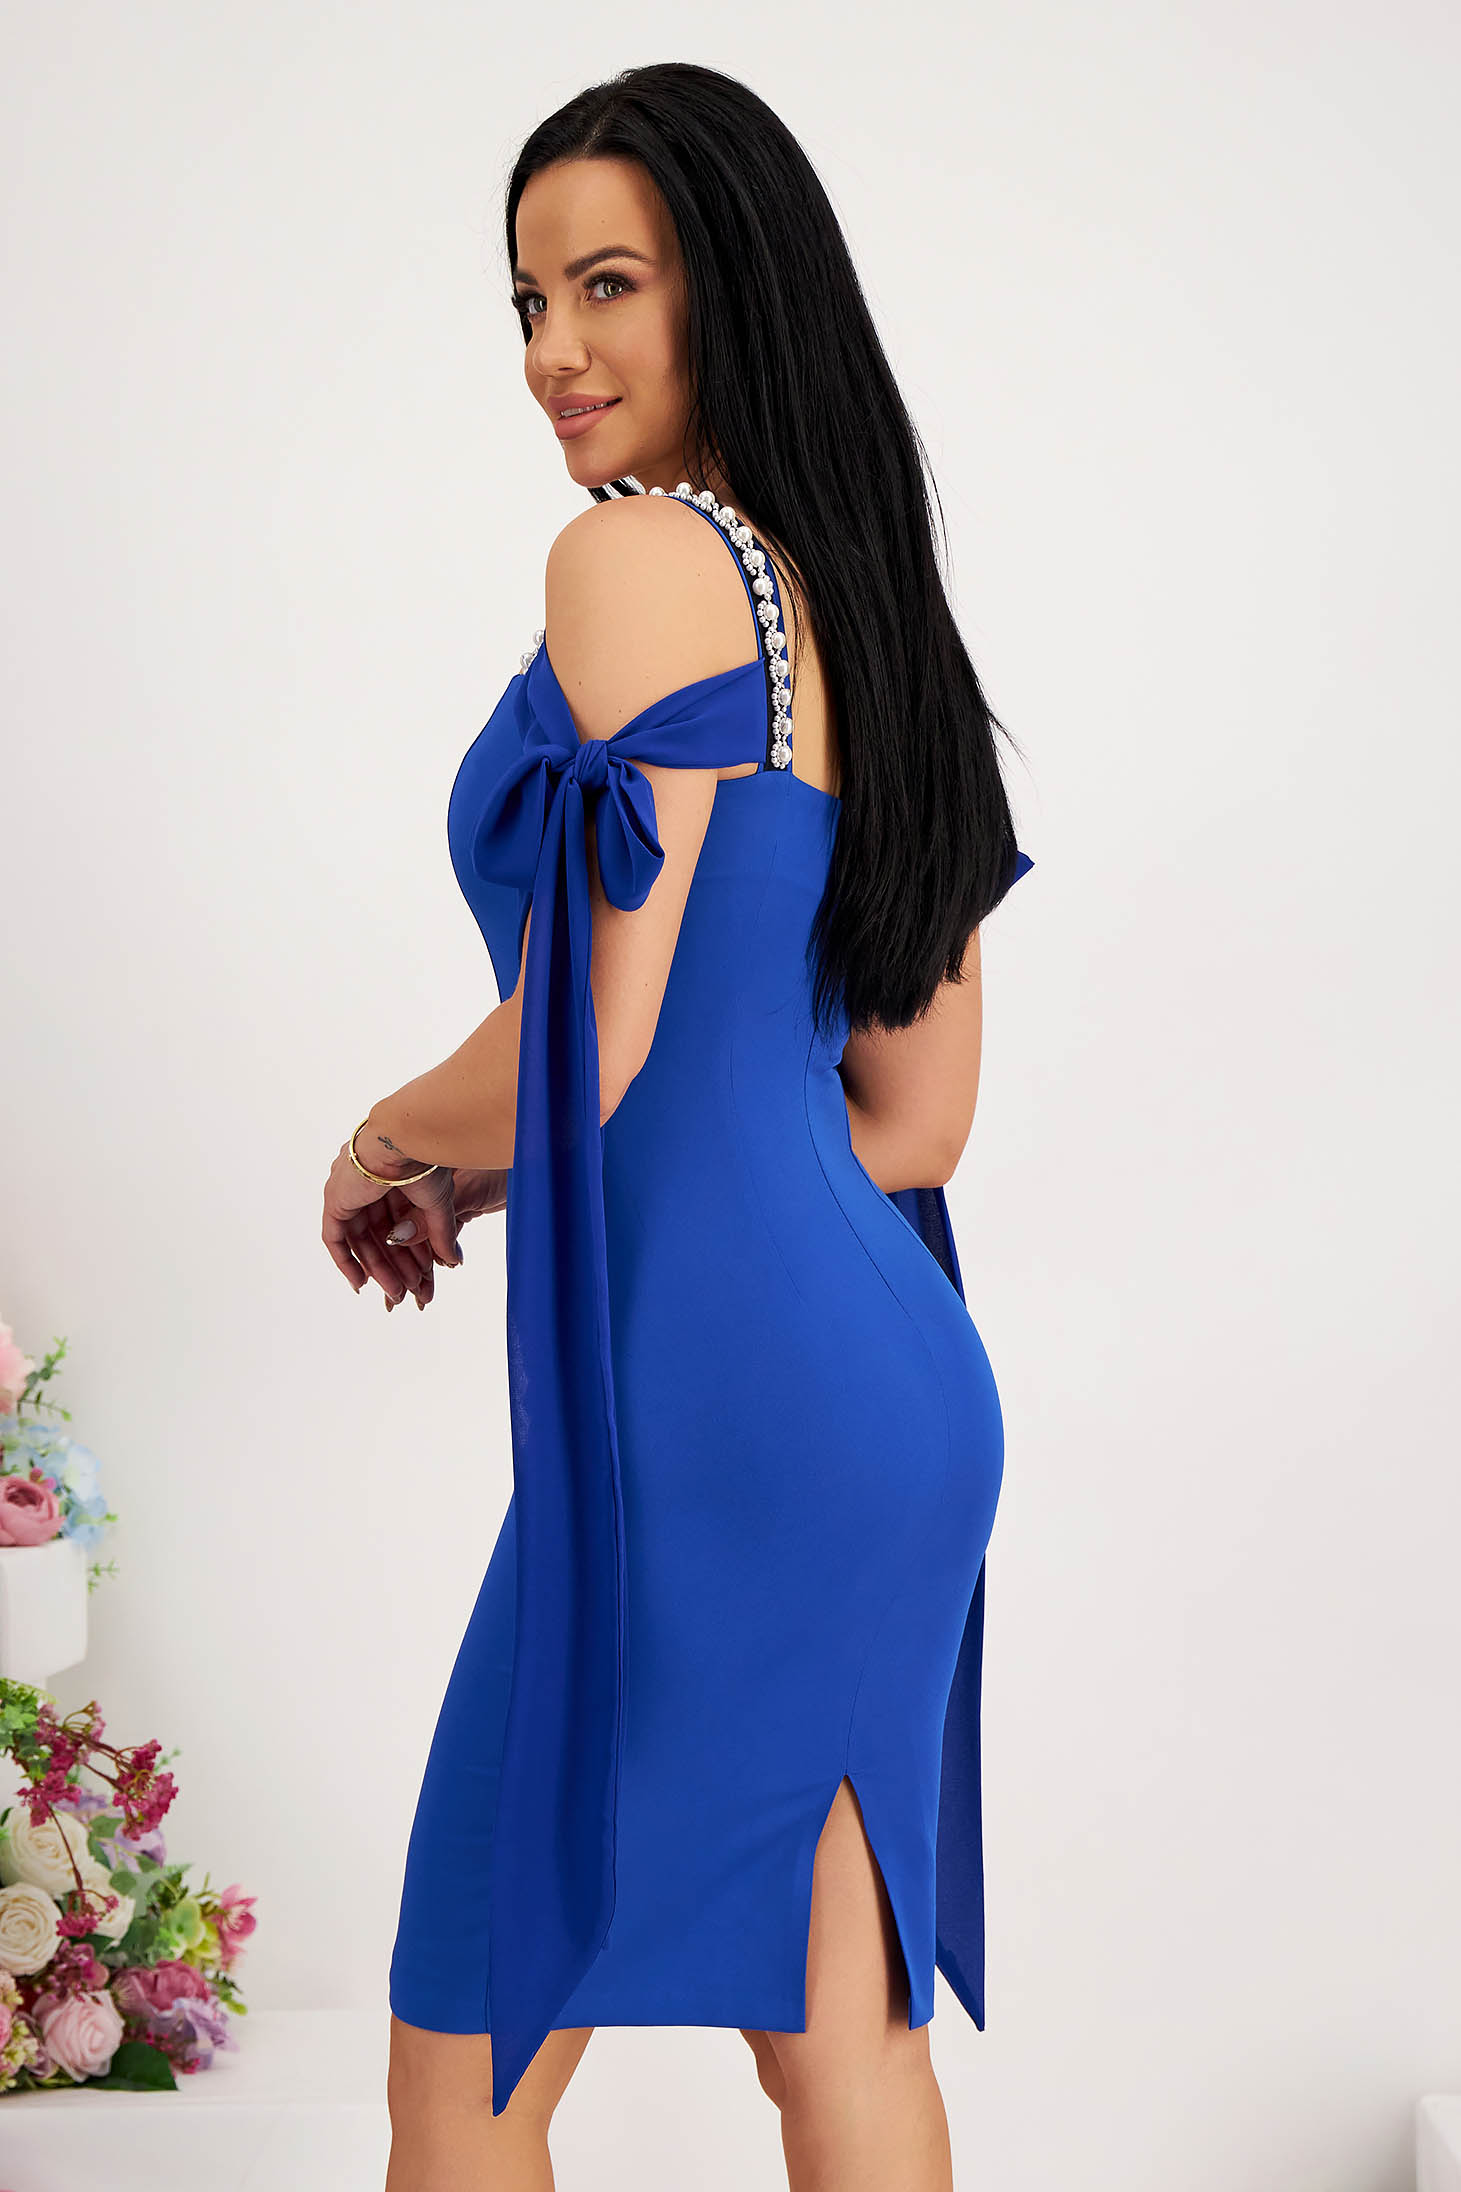 Blue Elastic Fabric Knee-Length Pencil Dress with Pearl Applications - StarShinerS 2 - StarShinerS.com